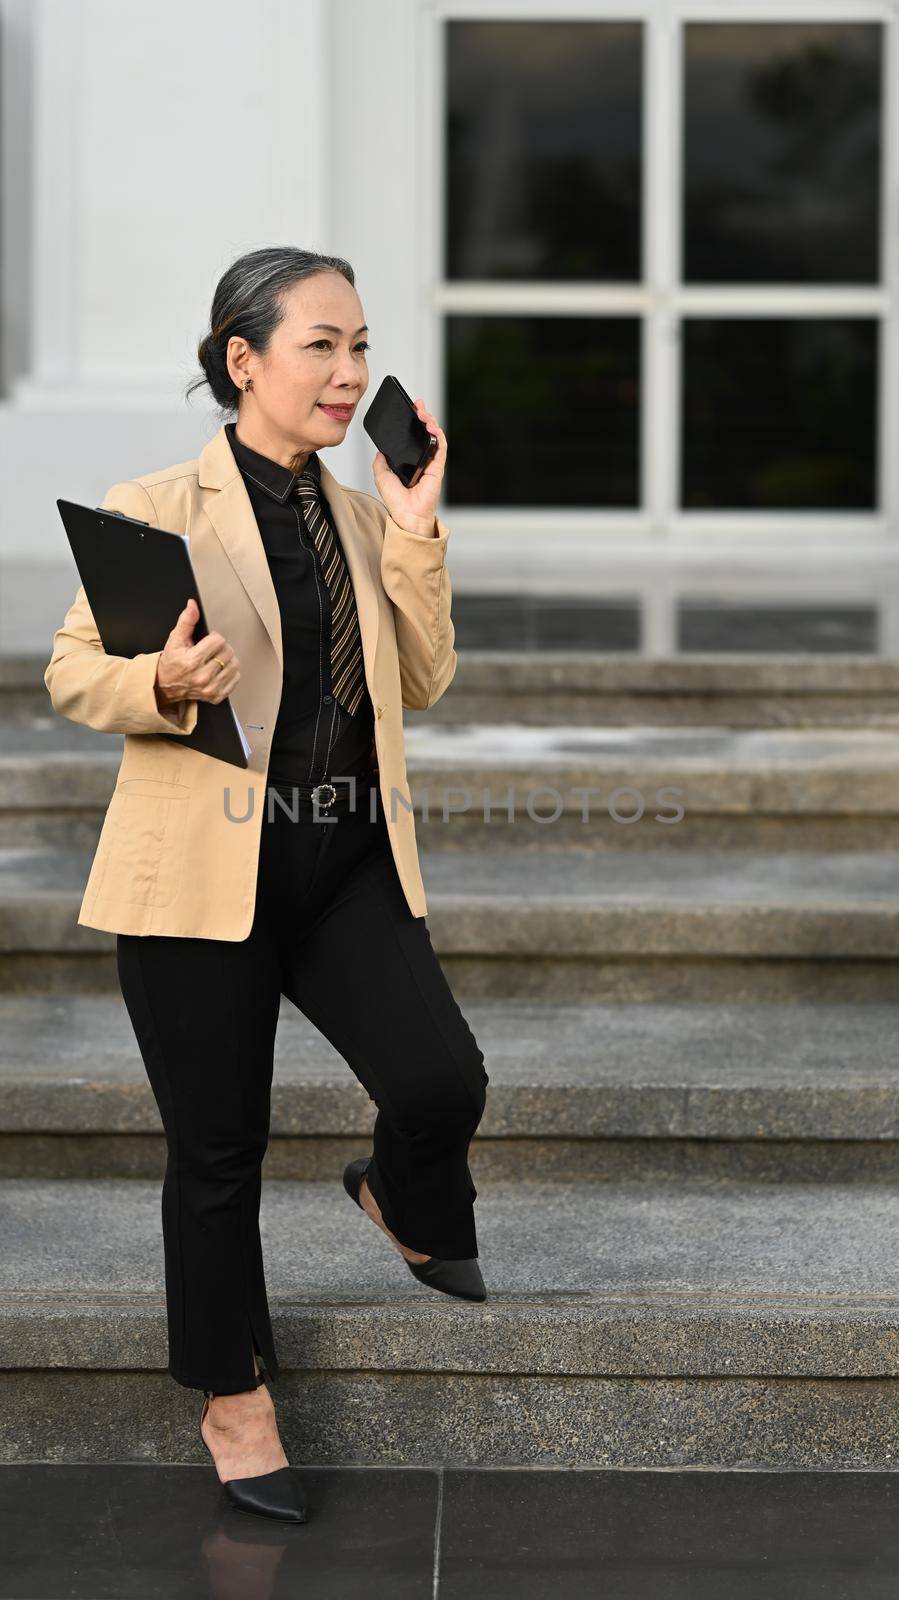 Full length portrait of mature businesswoman talking on cell phone and standing in front of an office building.